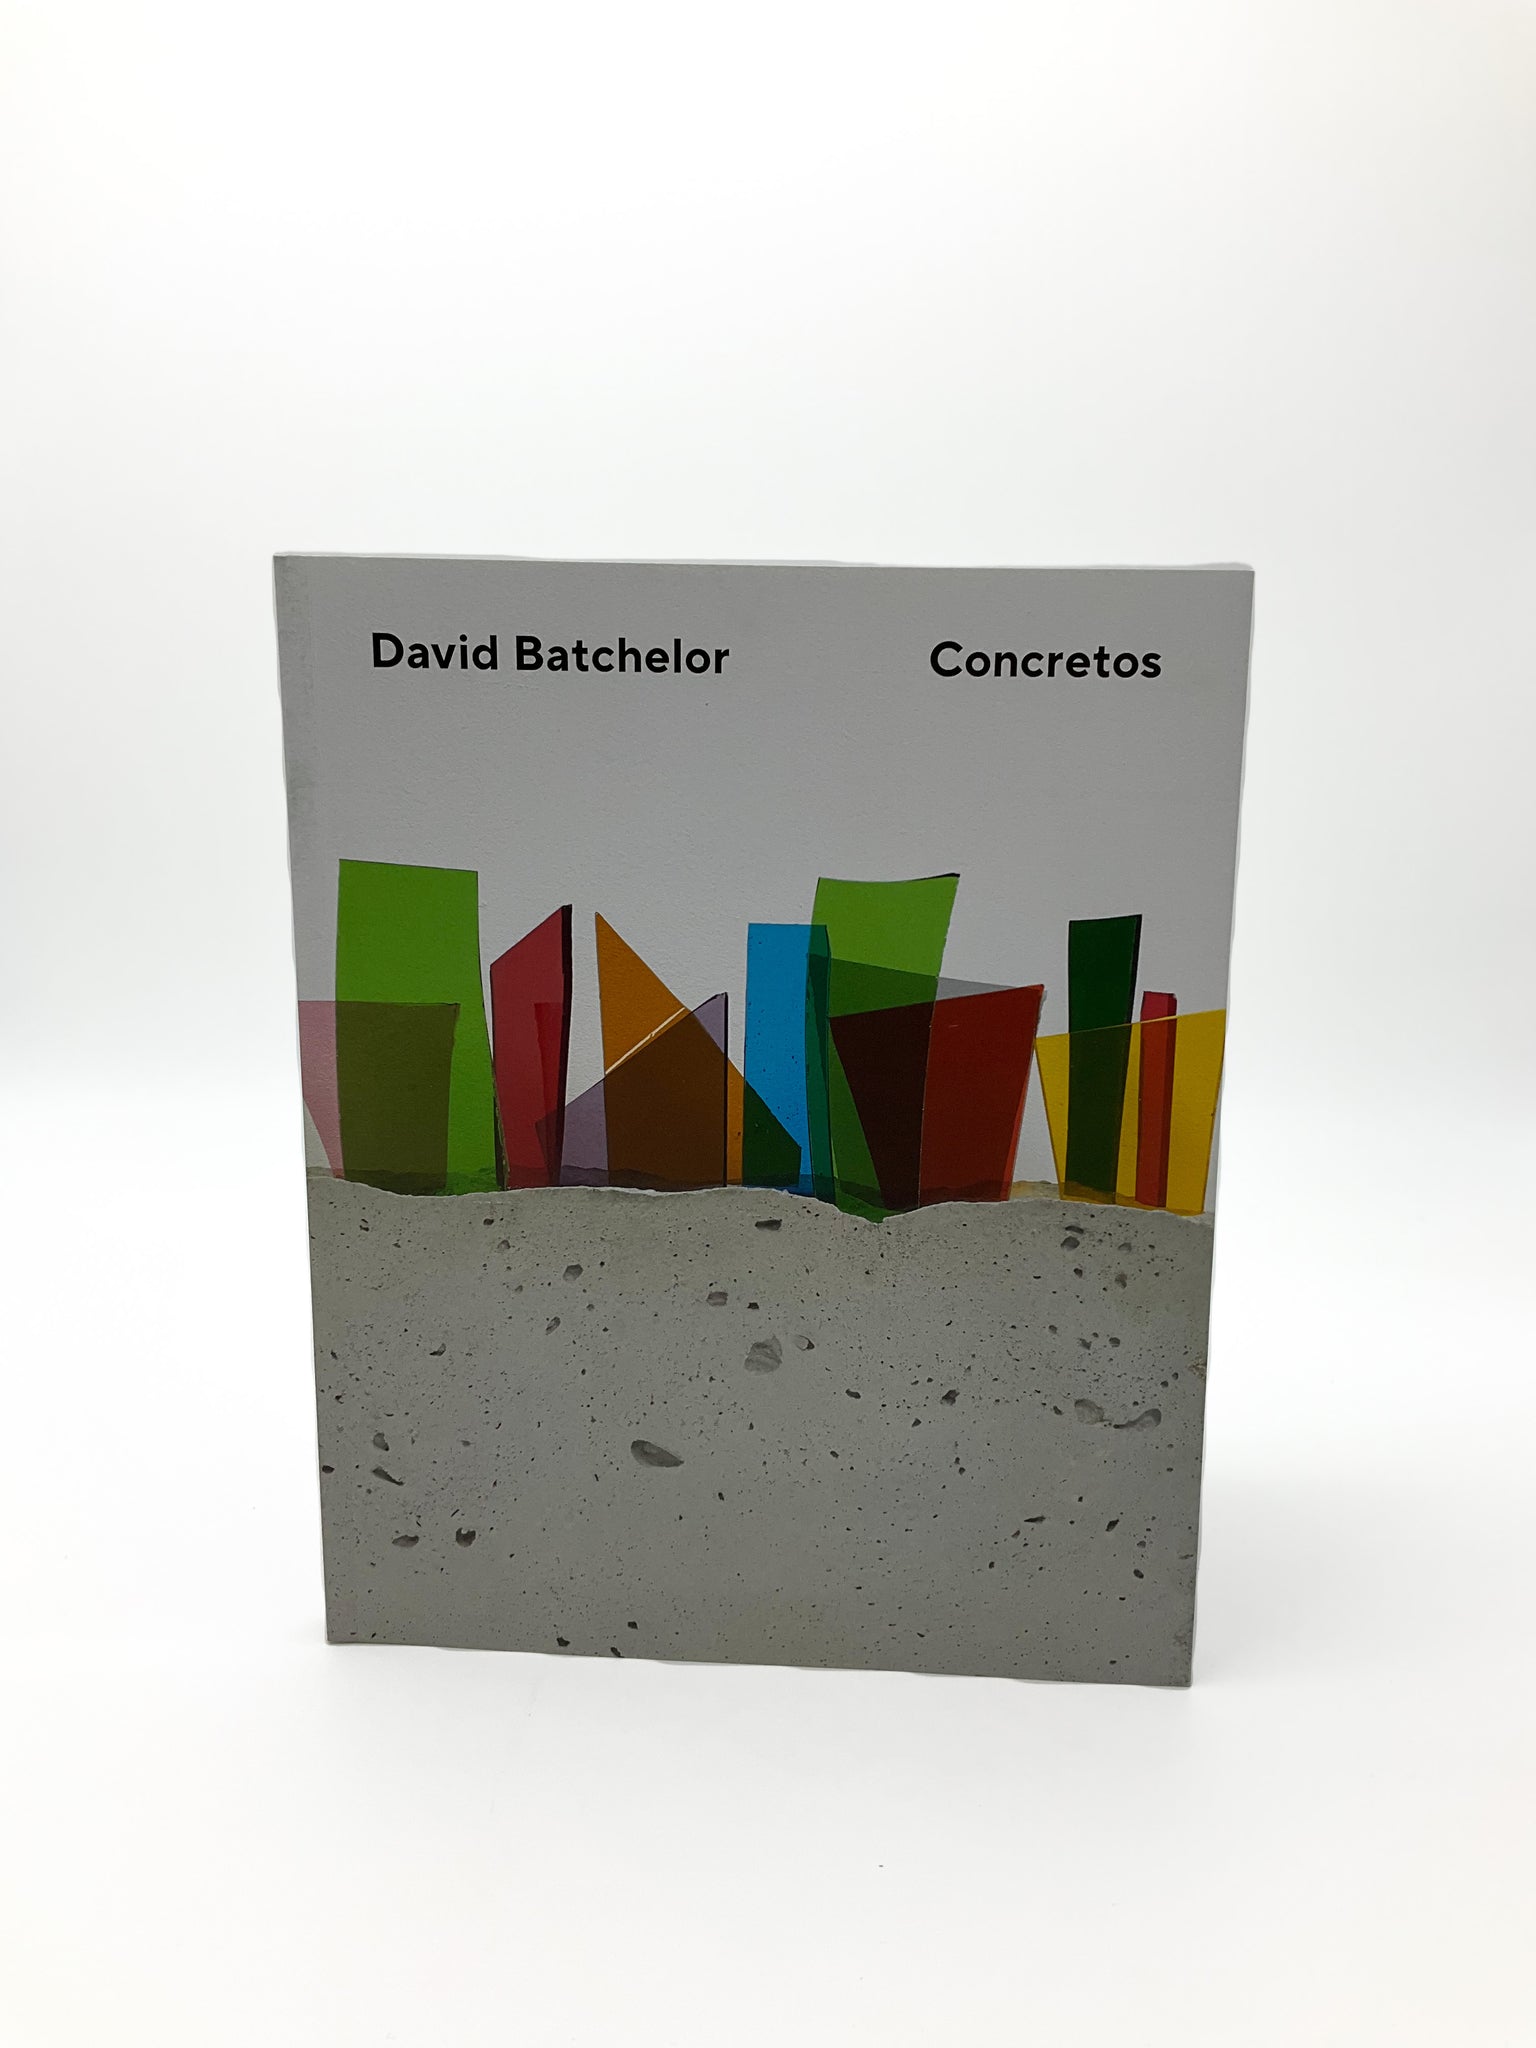 This new publication is devoted to an ongoing series of sculptures titled Concretos. First made in 2011, Concretos combine concrete with a variety of brightly colored – and often found – materials.